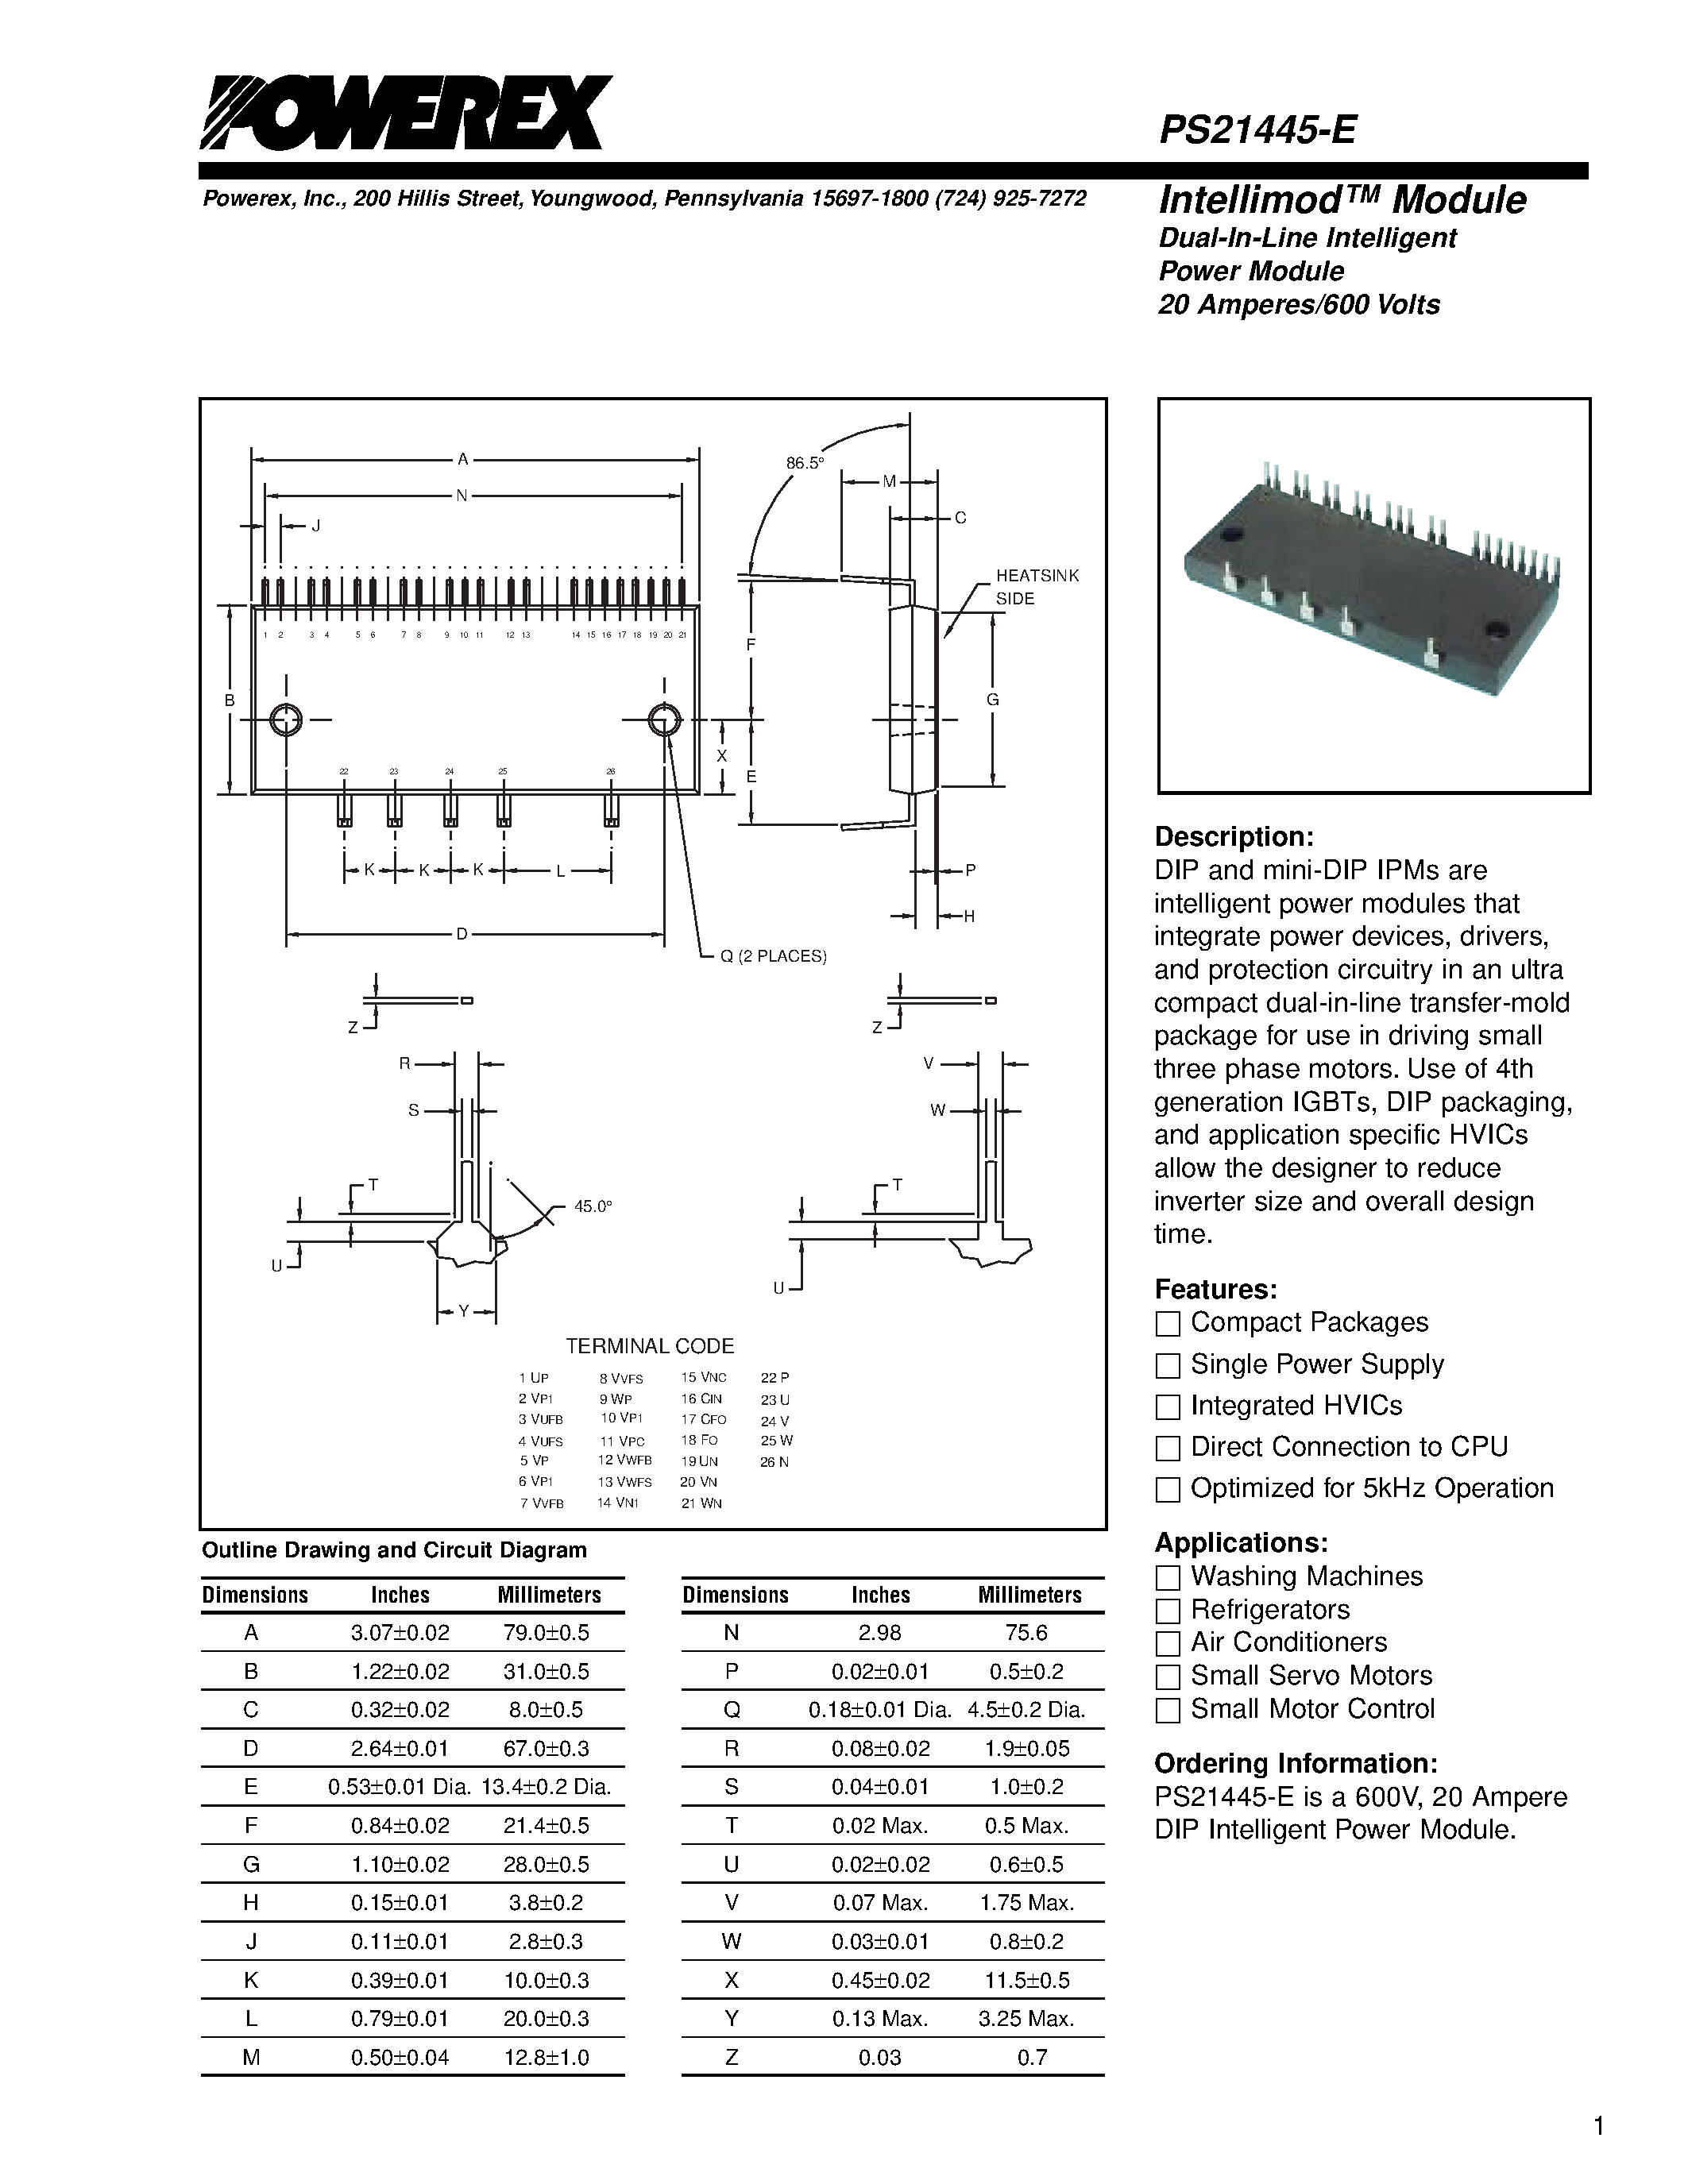 Datasheet PS21445-E - Intellimod Module Dual-In-Line Intelligent Power Module (20 Amperes/600 Volts) page 1